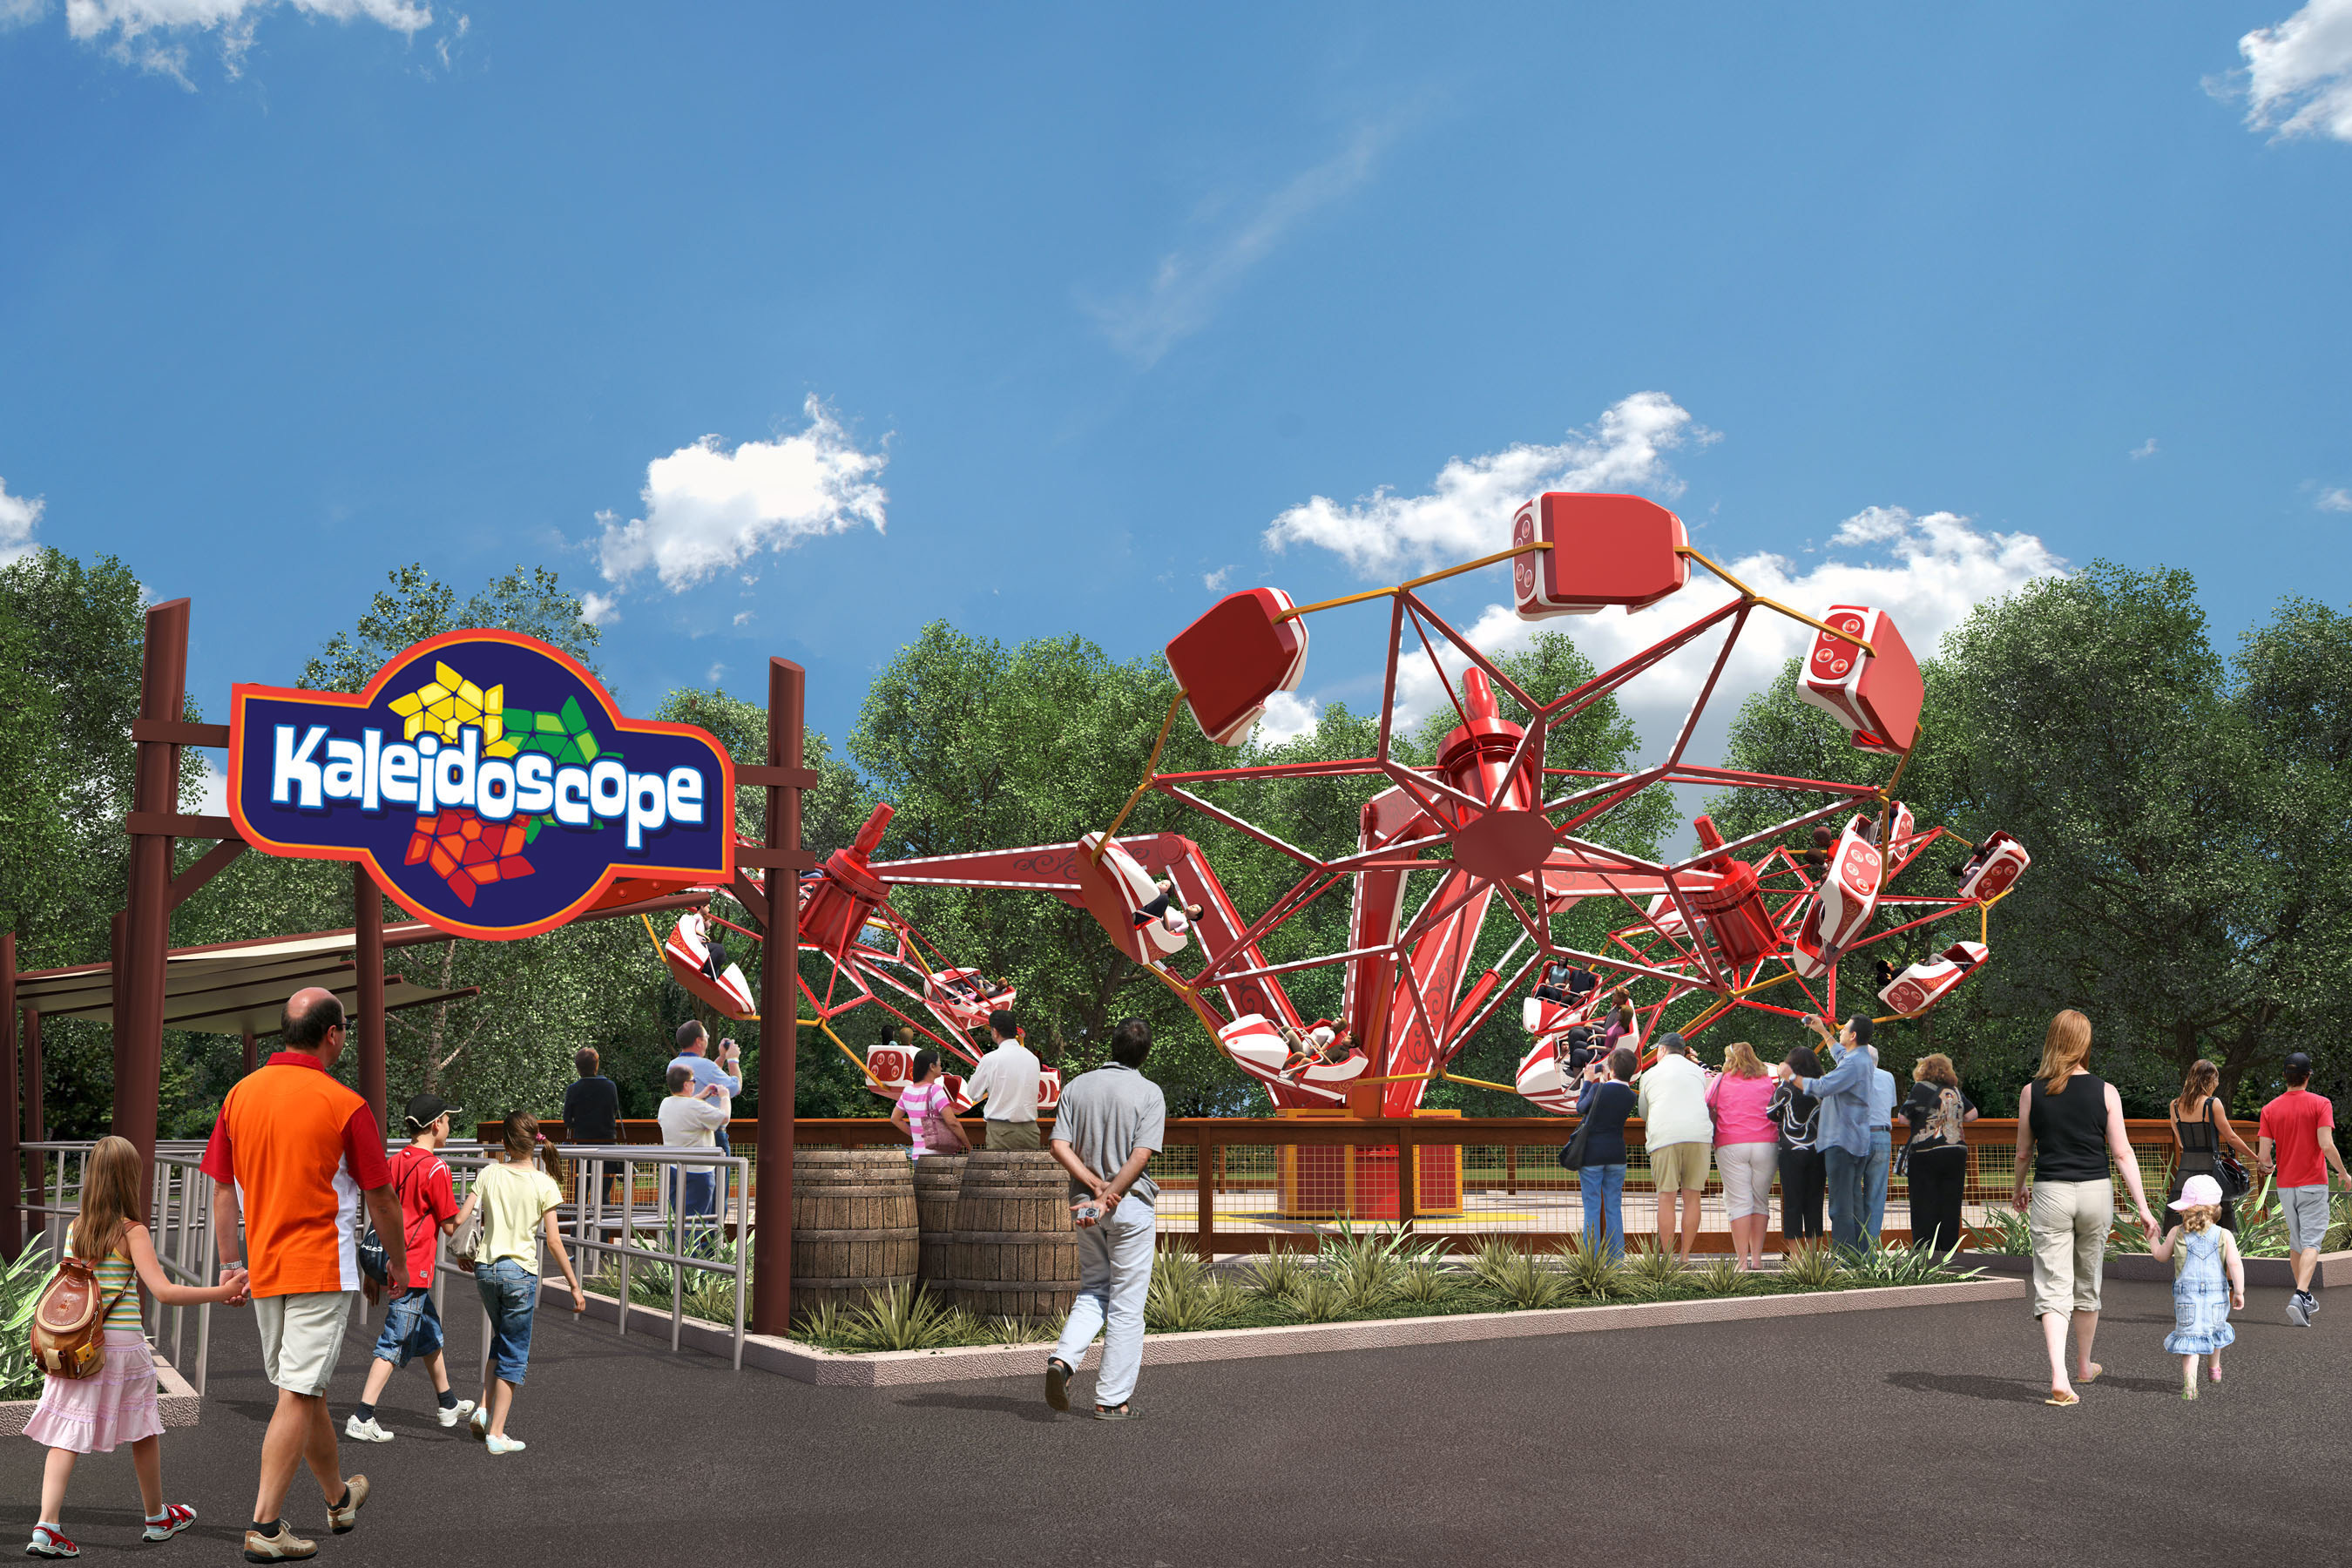 Riders on Kaleidoscope will experience weightlessness, strong accelerations and side-to-side movement.